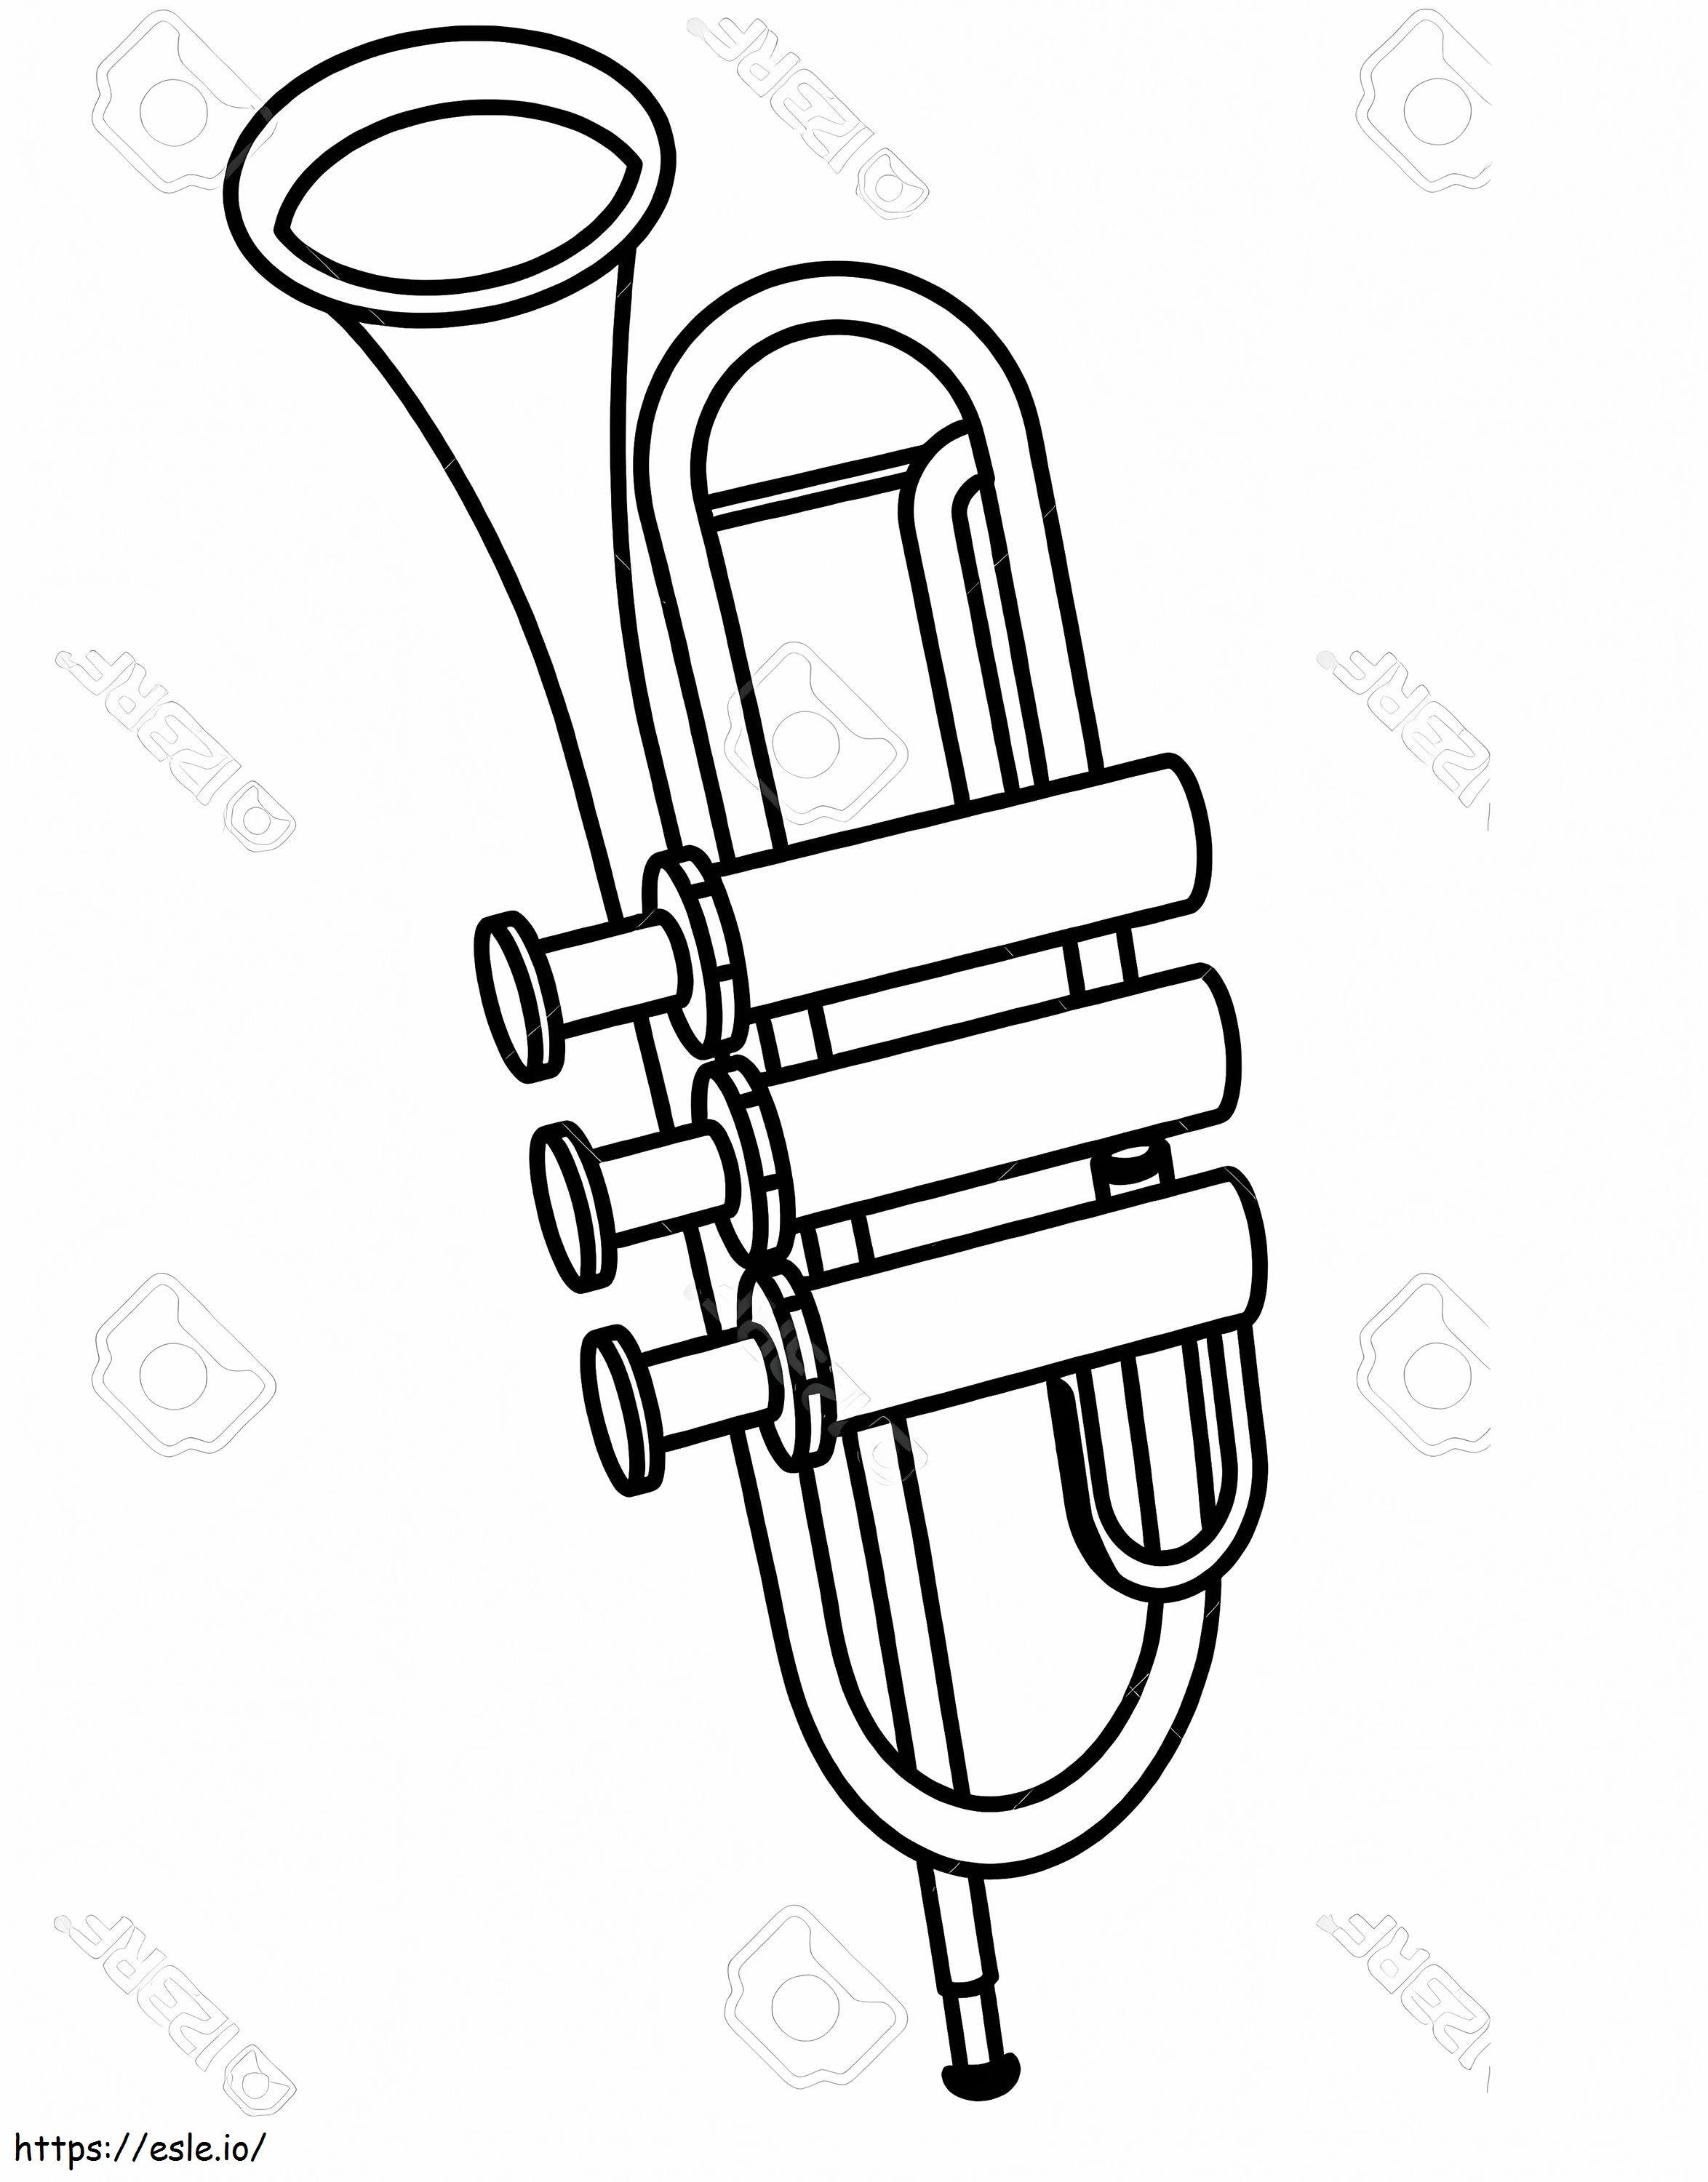 Normal Trumpet 3 coloring page